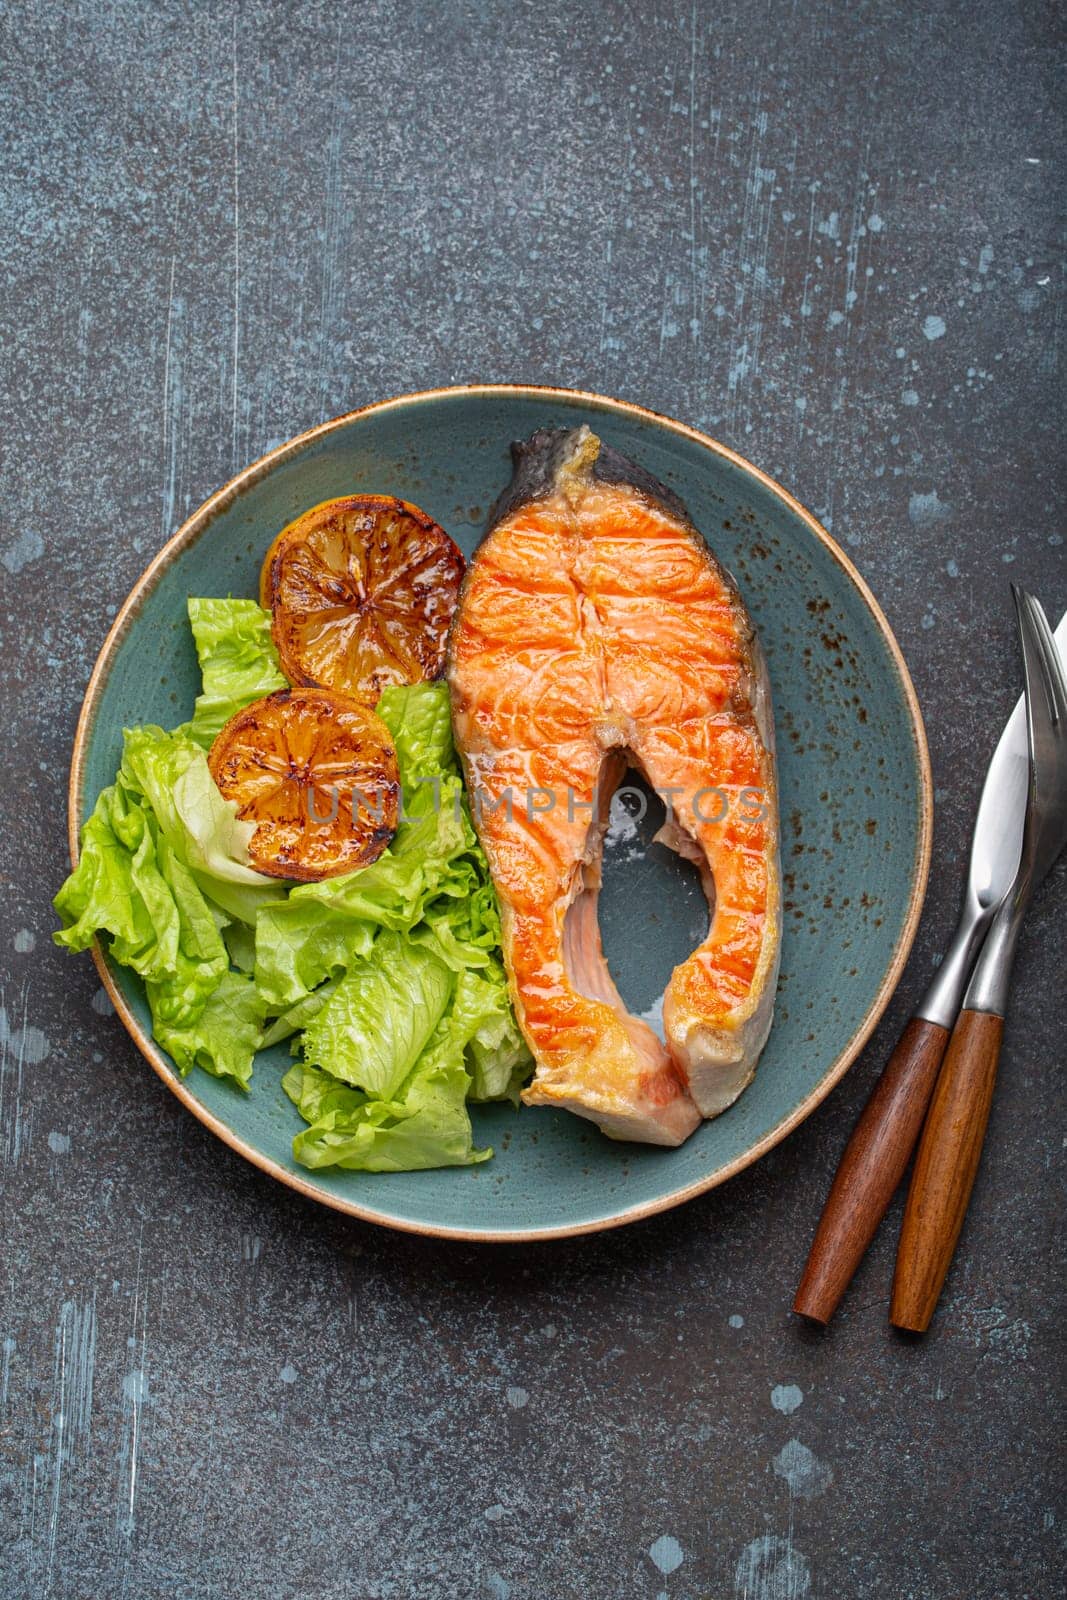 Grilled fish salmon steak and green salad with lemon on ceramic plate on rustic blue stone background top view, balanced diet or healthy nutrition meal with salmon and veggies by its_al_dente